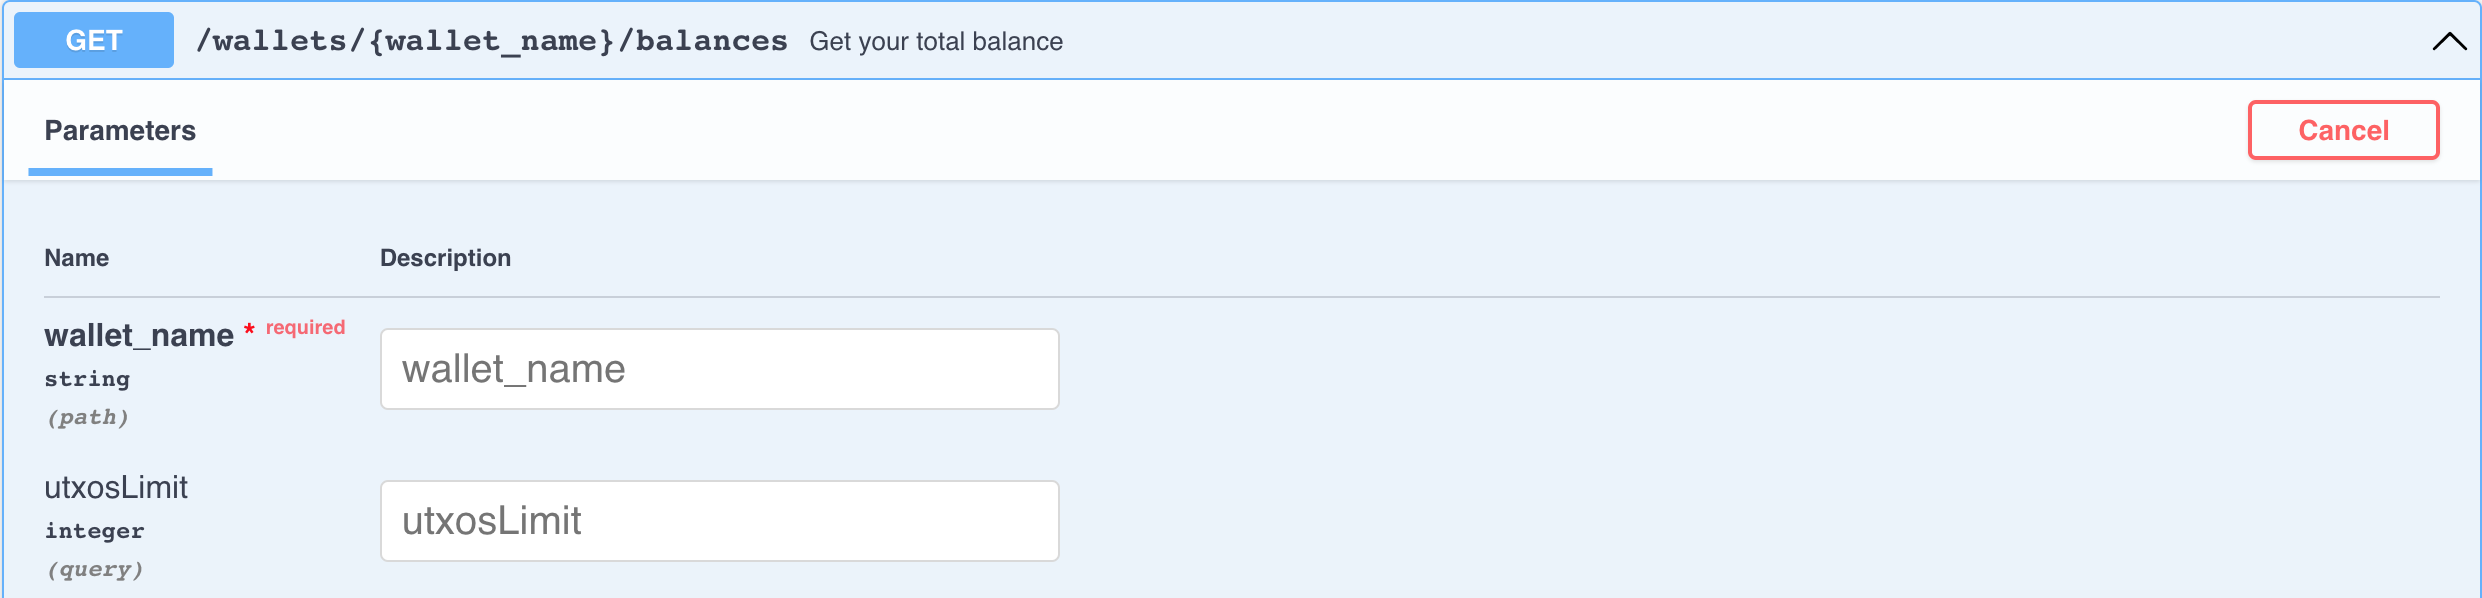 miner-wallet-balance-query